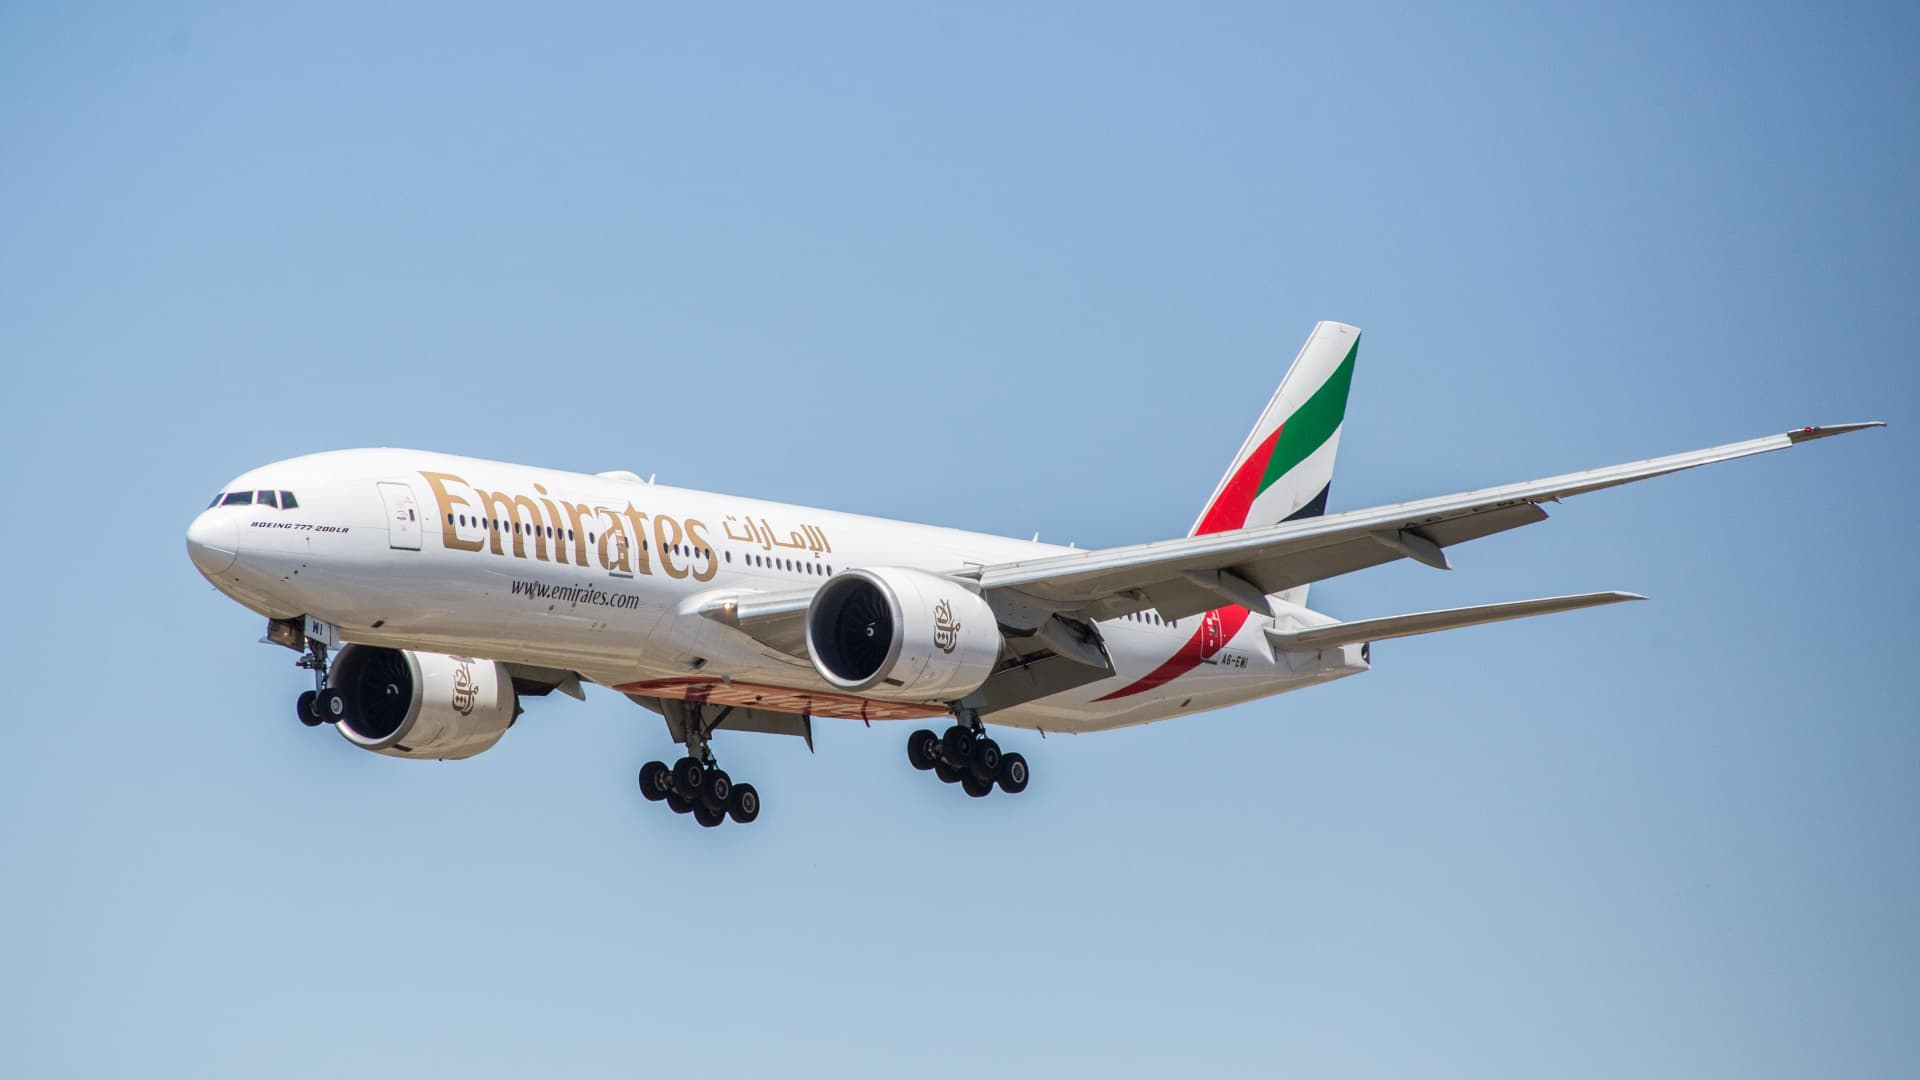 Emirates Airline slams Heathrow Airport’s ‘unacceptable’ demand to cut flights, refuses to comply